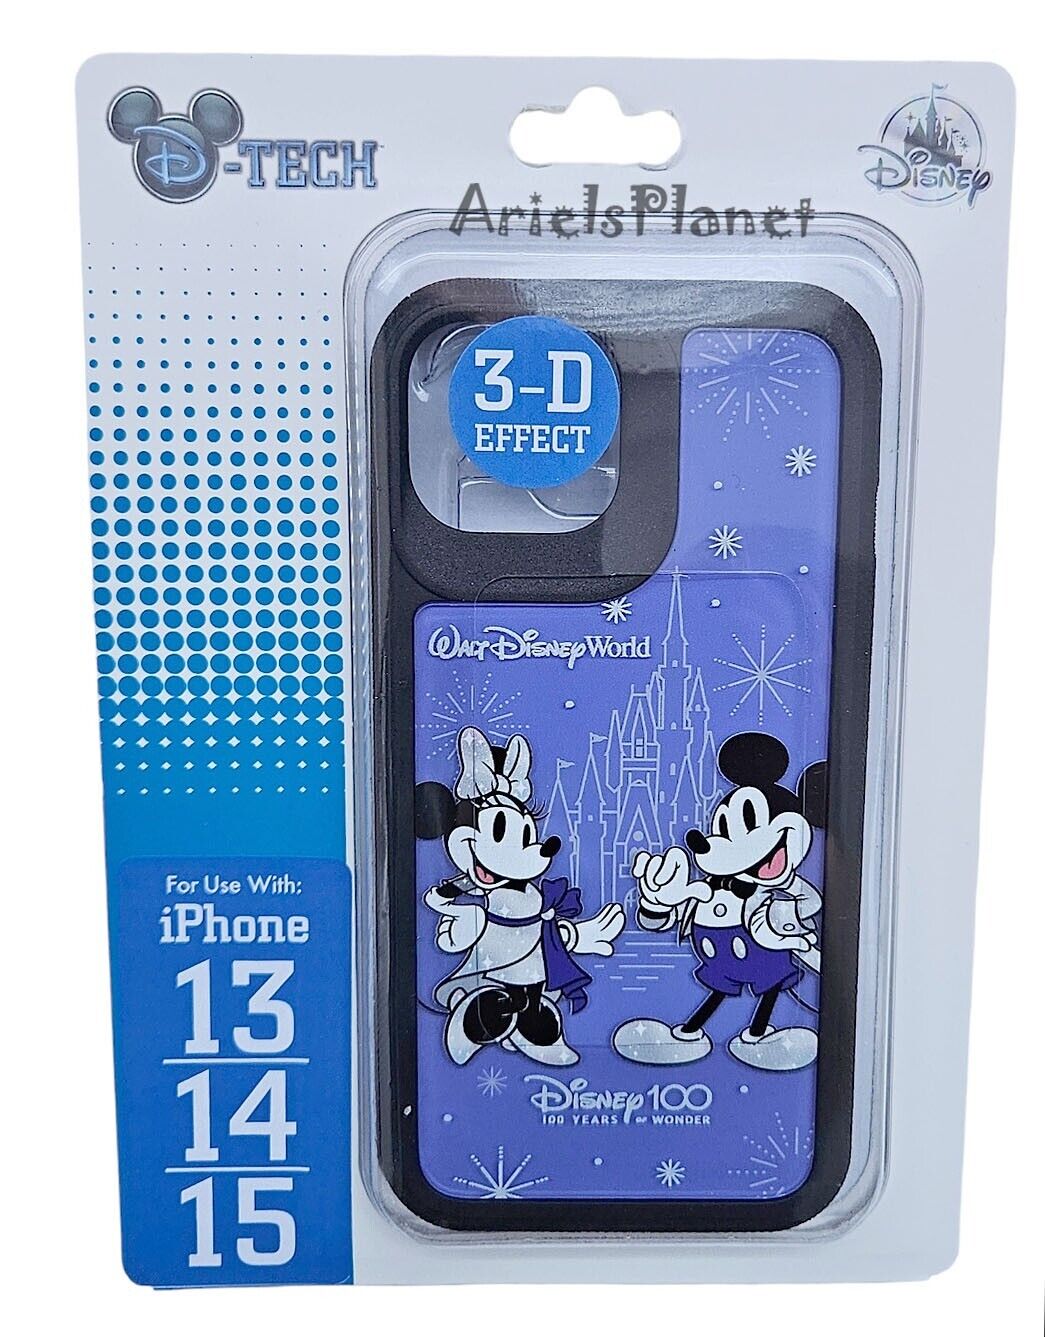 2023 DISNEY PARKS MICKEY & Minnie 100th Anniversary iPhone 13, 14, & 15 Cover